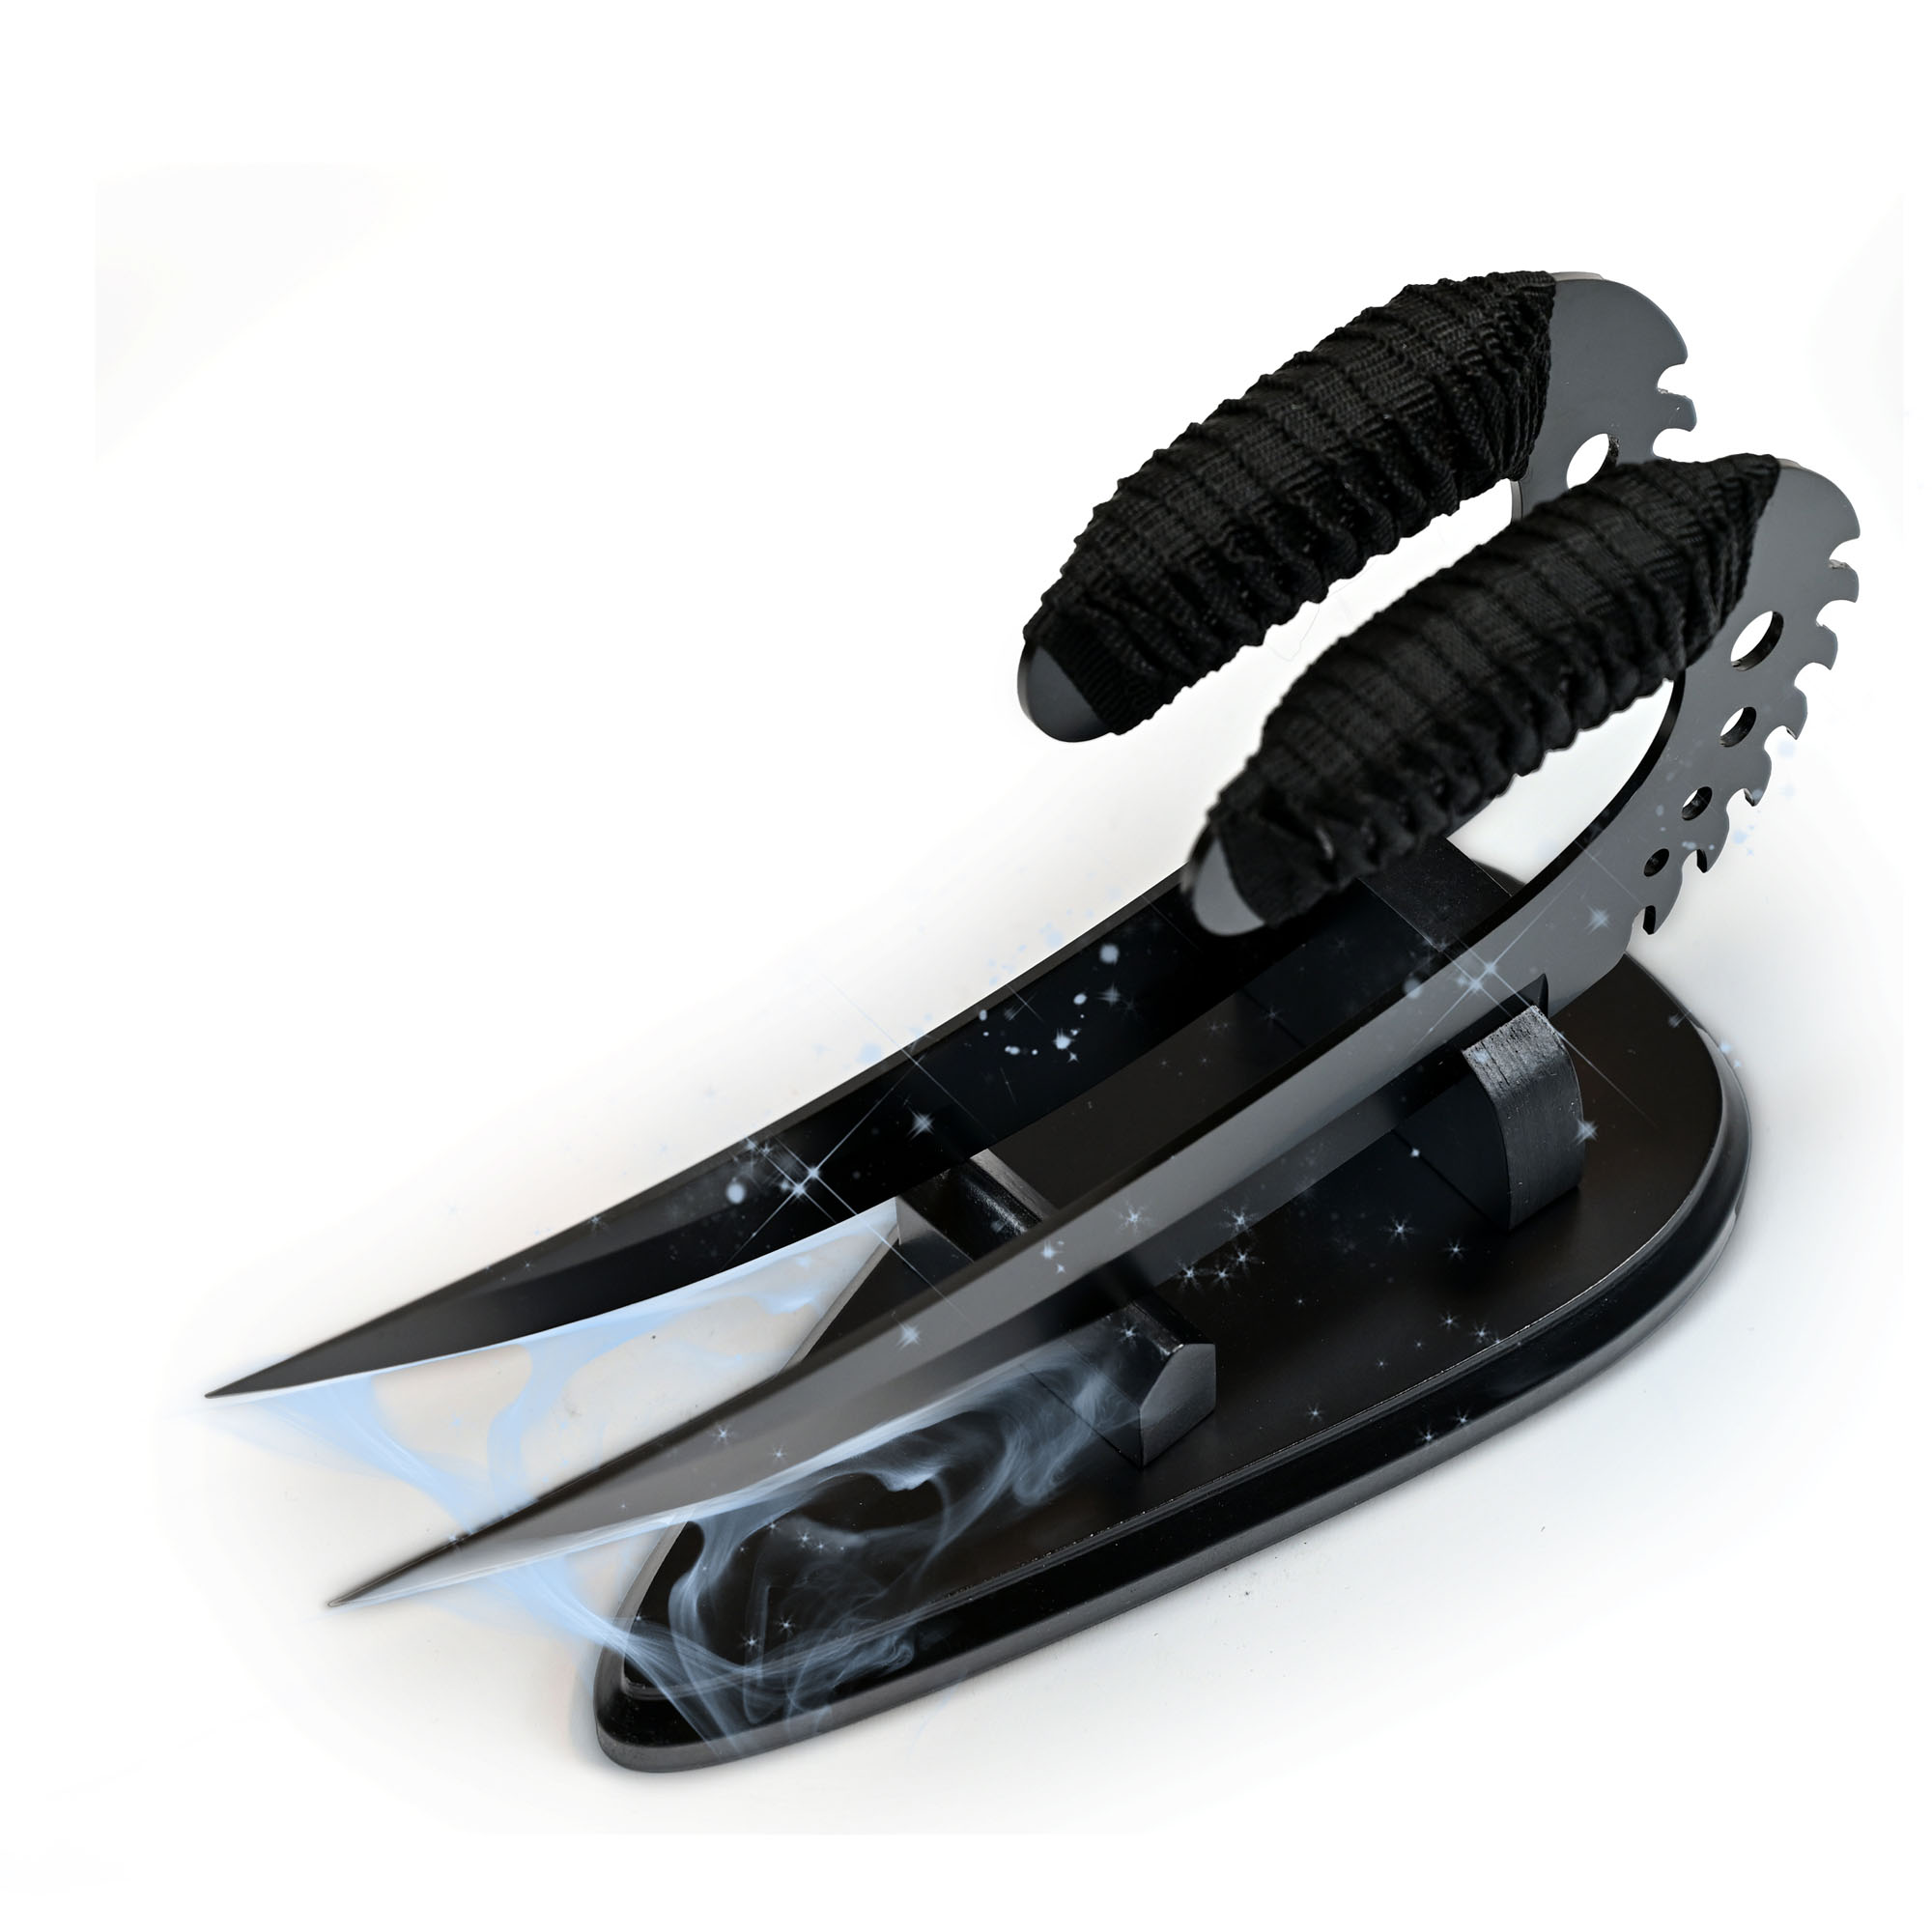 The Chronicles of Riddick - Black Sabre Claws